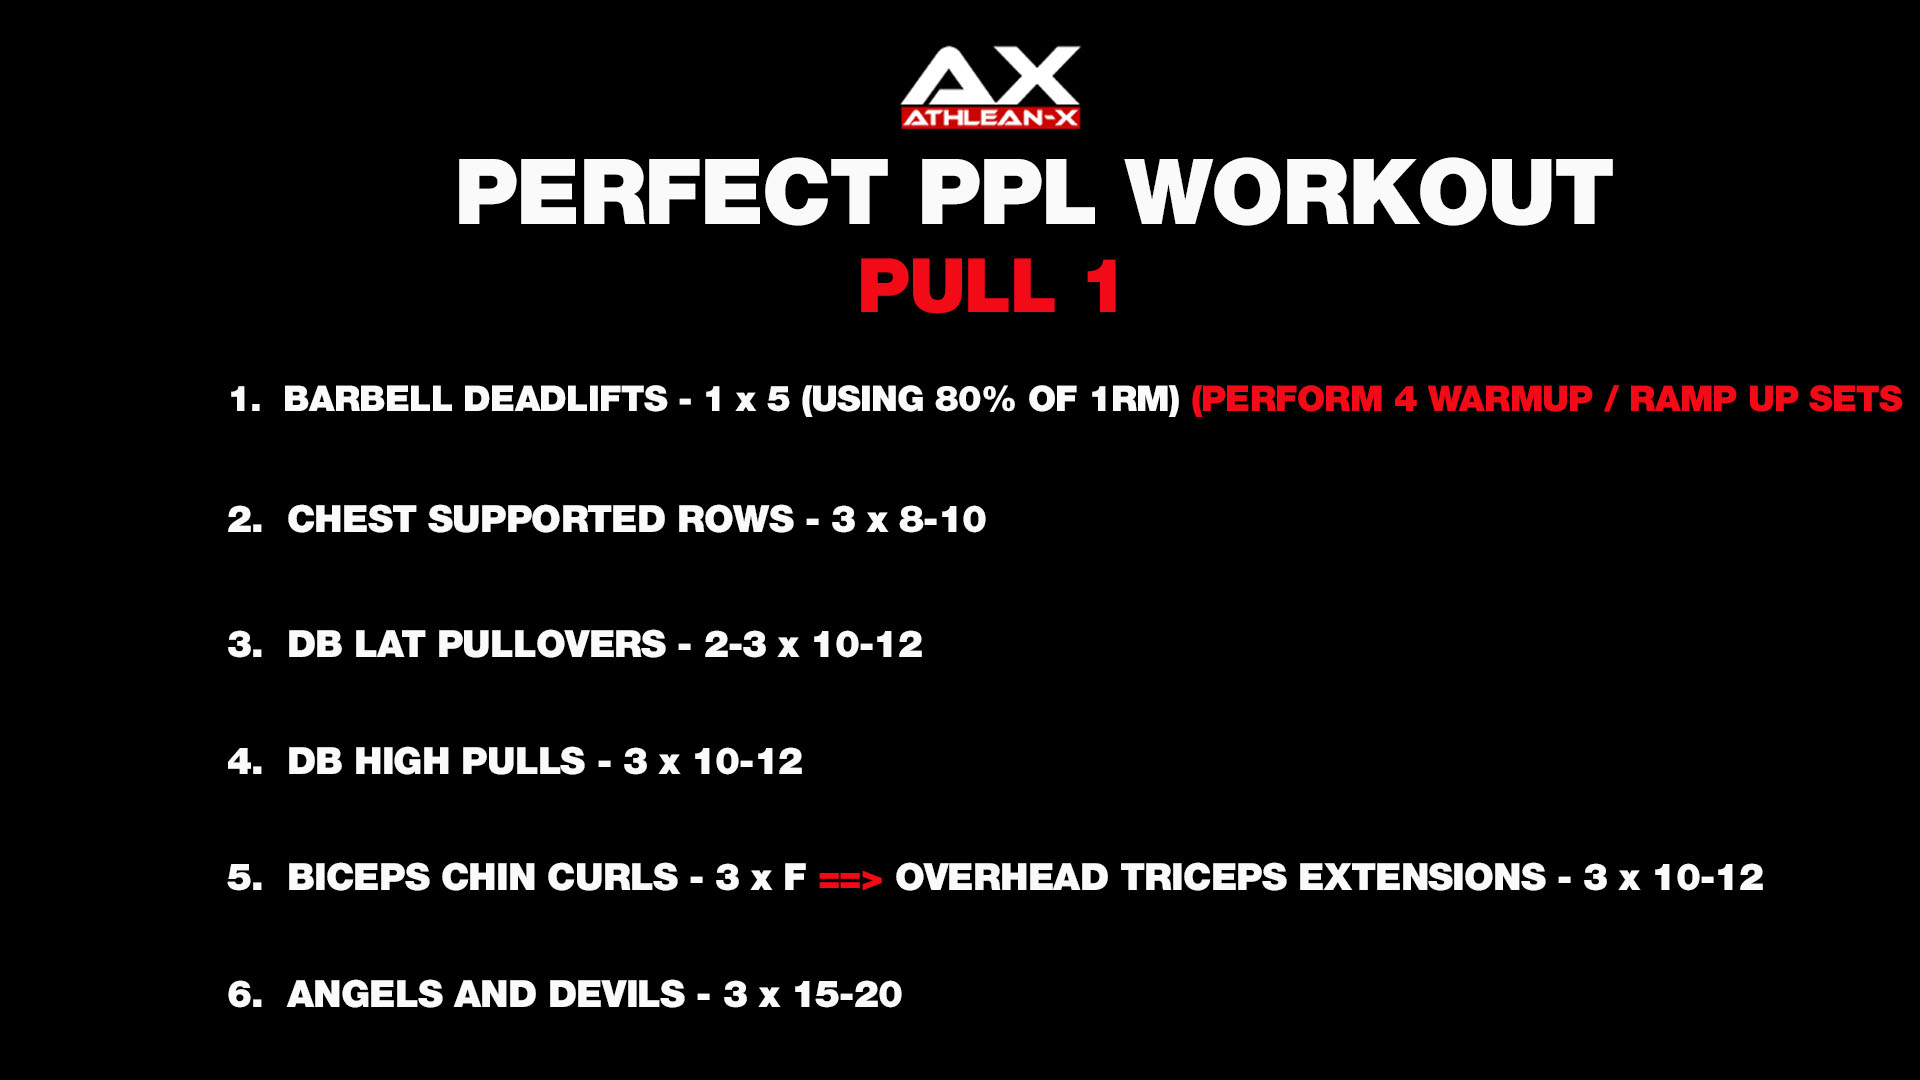 PULL WORKOUT 1